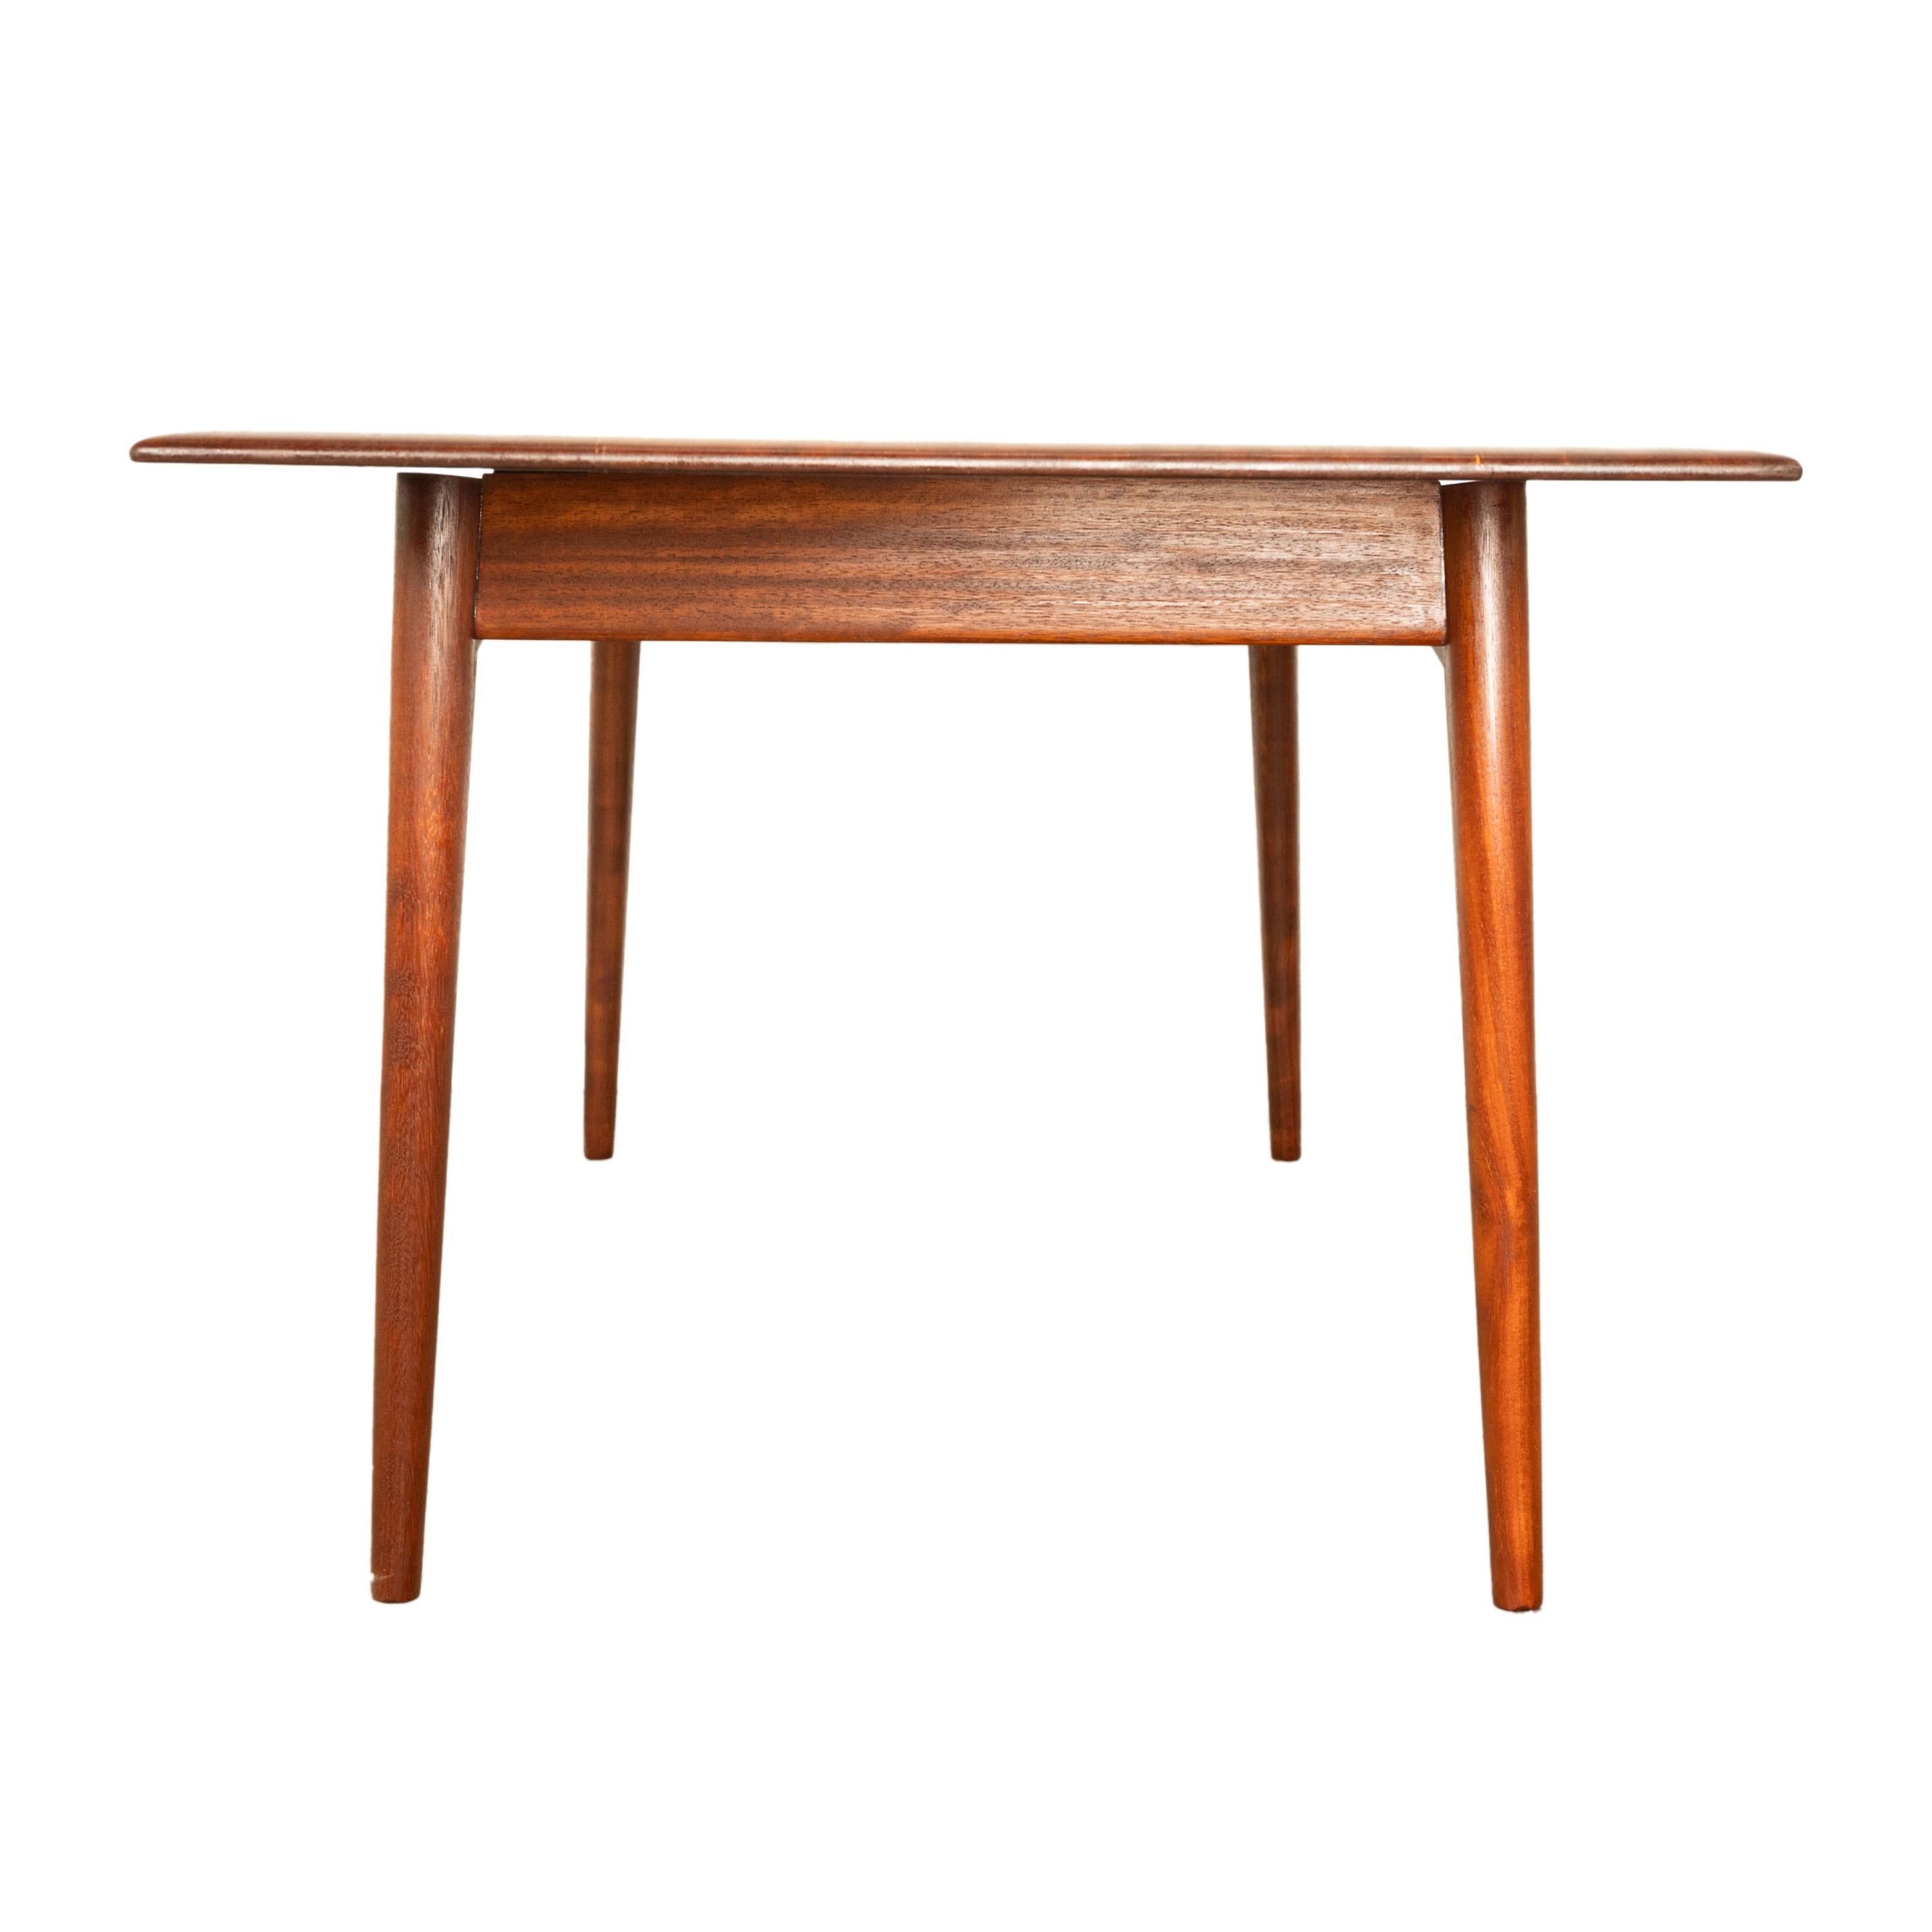 Mid Century Modern Danish Style Solid Teak Afromosia 8 Seat Dining Table 1960 For Sale 4